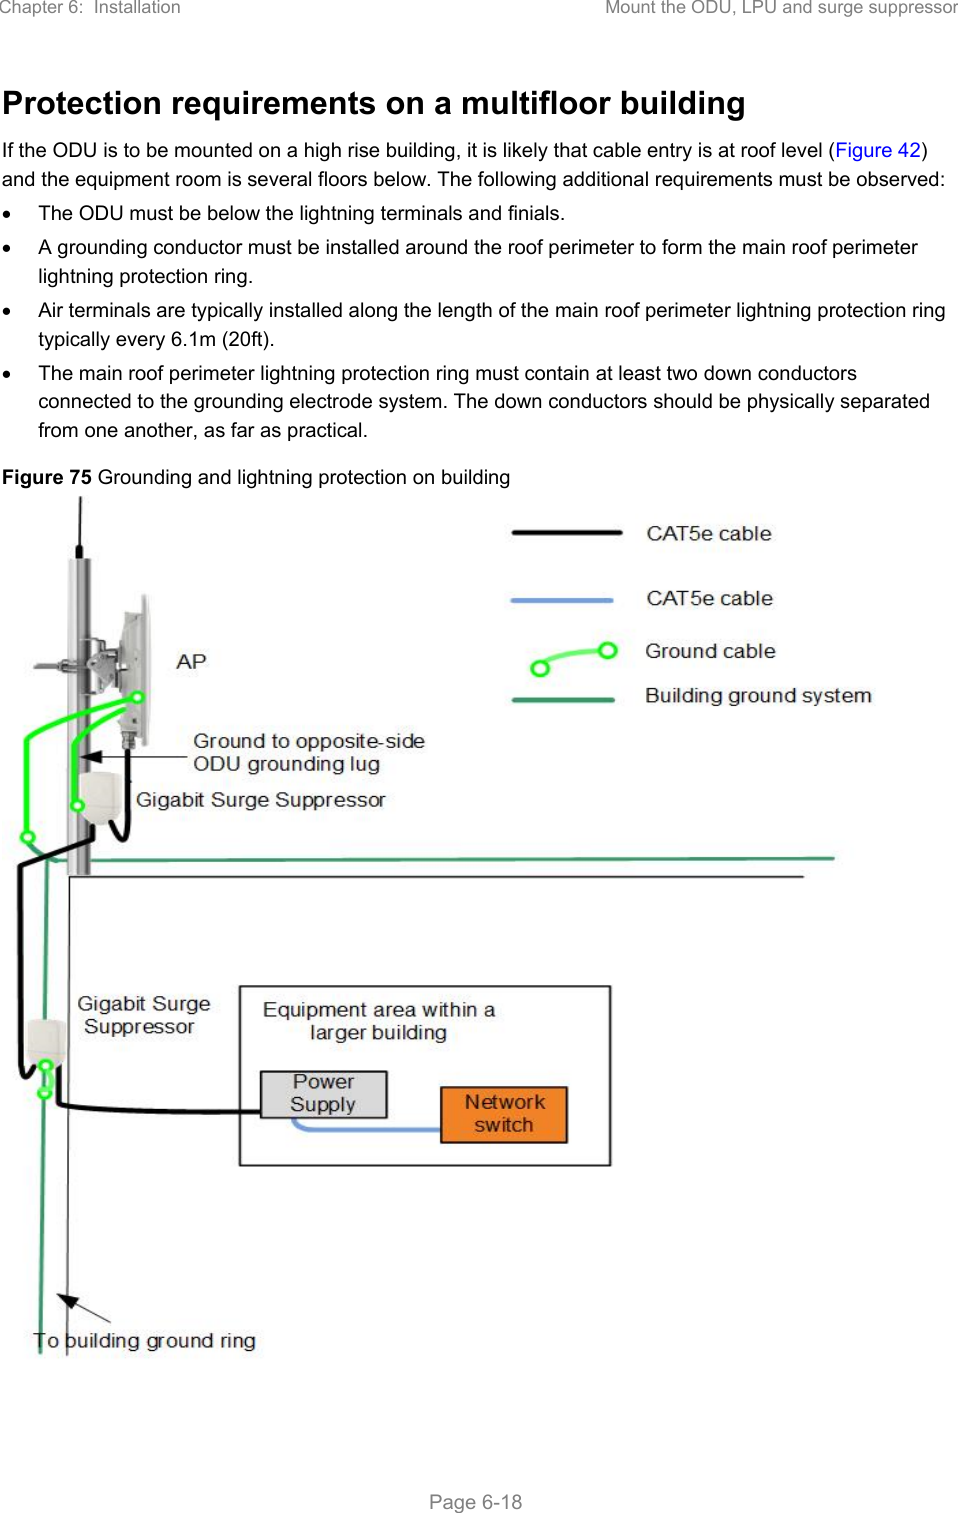 Chapter 6:  Installation  Mount the ODU, LPU and surge suppressor   Page 6-18 Protection requirements on a multifloor building If the ODU is to be mounted on a high rise building, it is likely that cable entry is at roof level (Figure 42) and the equipment room is several floors below. The following additional requirements must be observed:   The ODU must be below the lightning terminals and finials.   A grounding conductor must be installed around the roof perimeter to form the main roof perimeter lightning protection ring.   Air terminals are typically installed along the length of the main roof perimeter lightning protection ring typically every 6.1m (20ft).   The main roof perimeter lightning protection ring must contain at least two down conductors connected to the grounding electrode system. The down conductors should be physically separated from one another, as far as practical. Figure 75 Grounding and lightning protection on building  